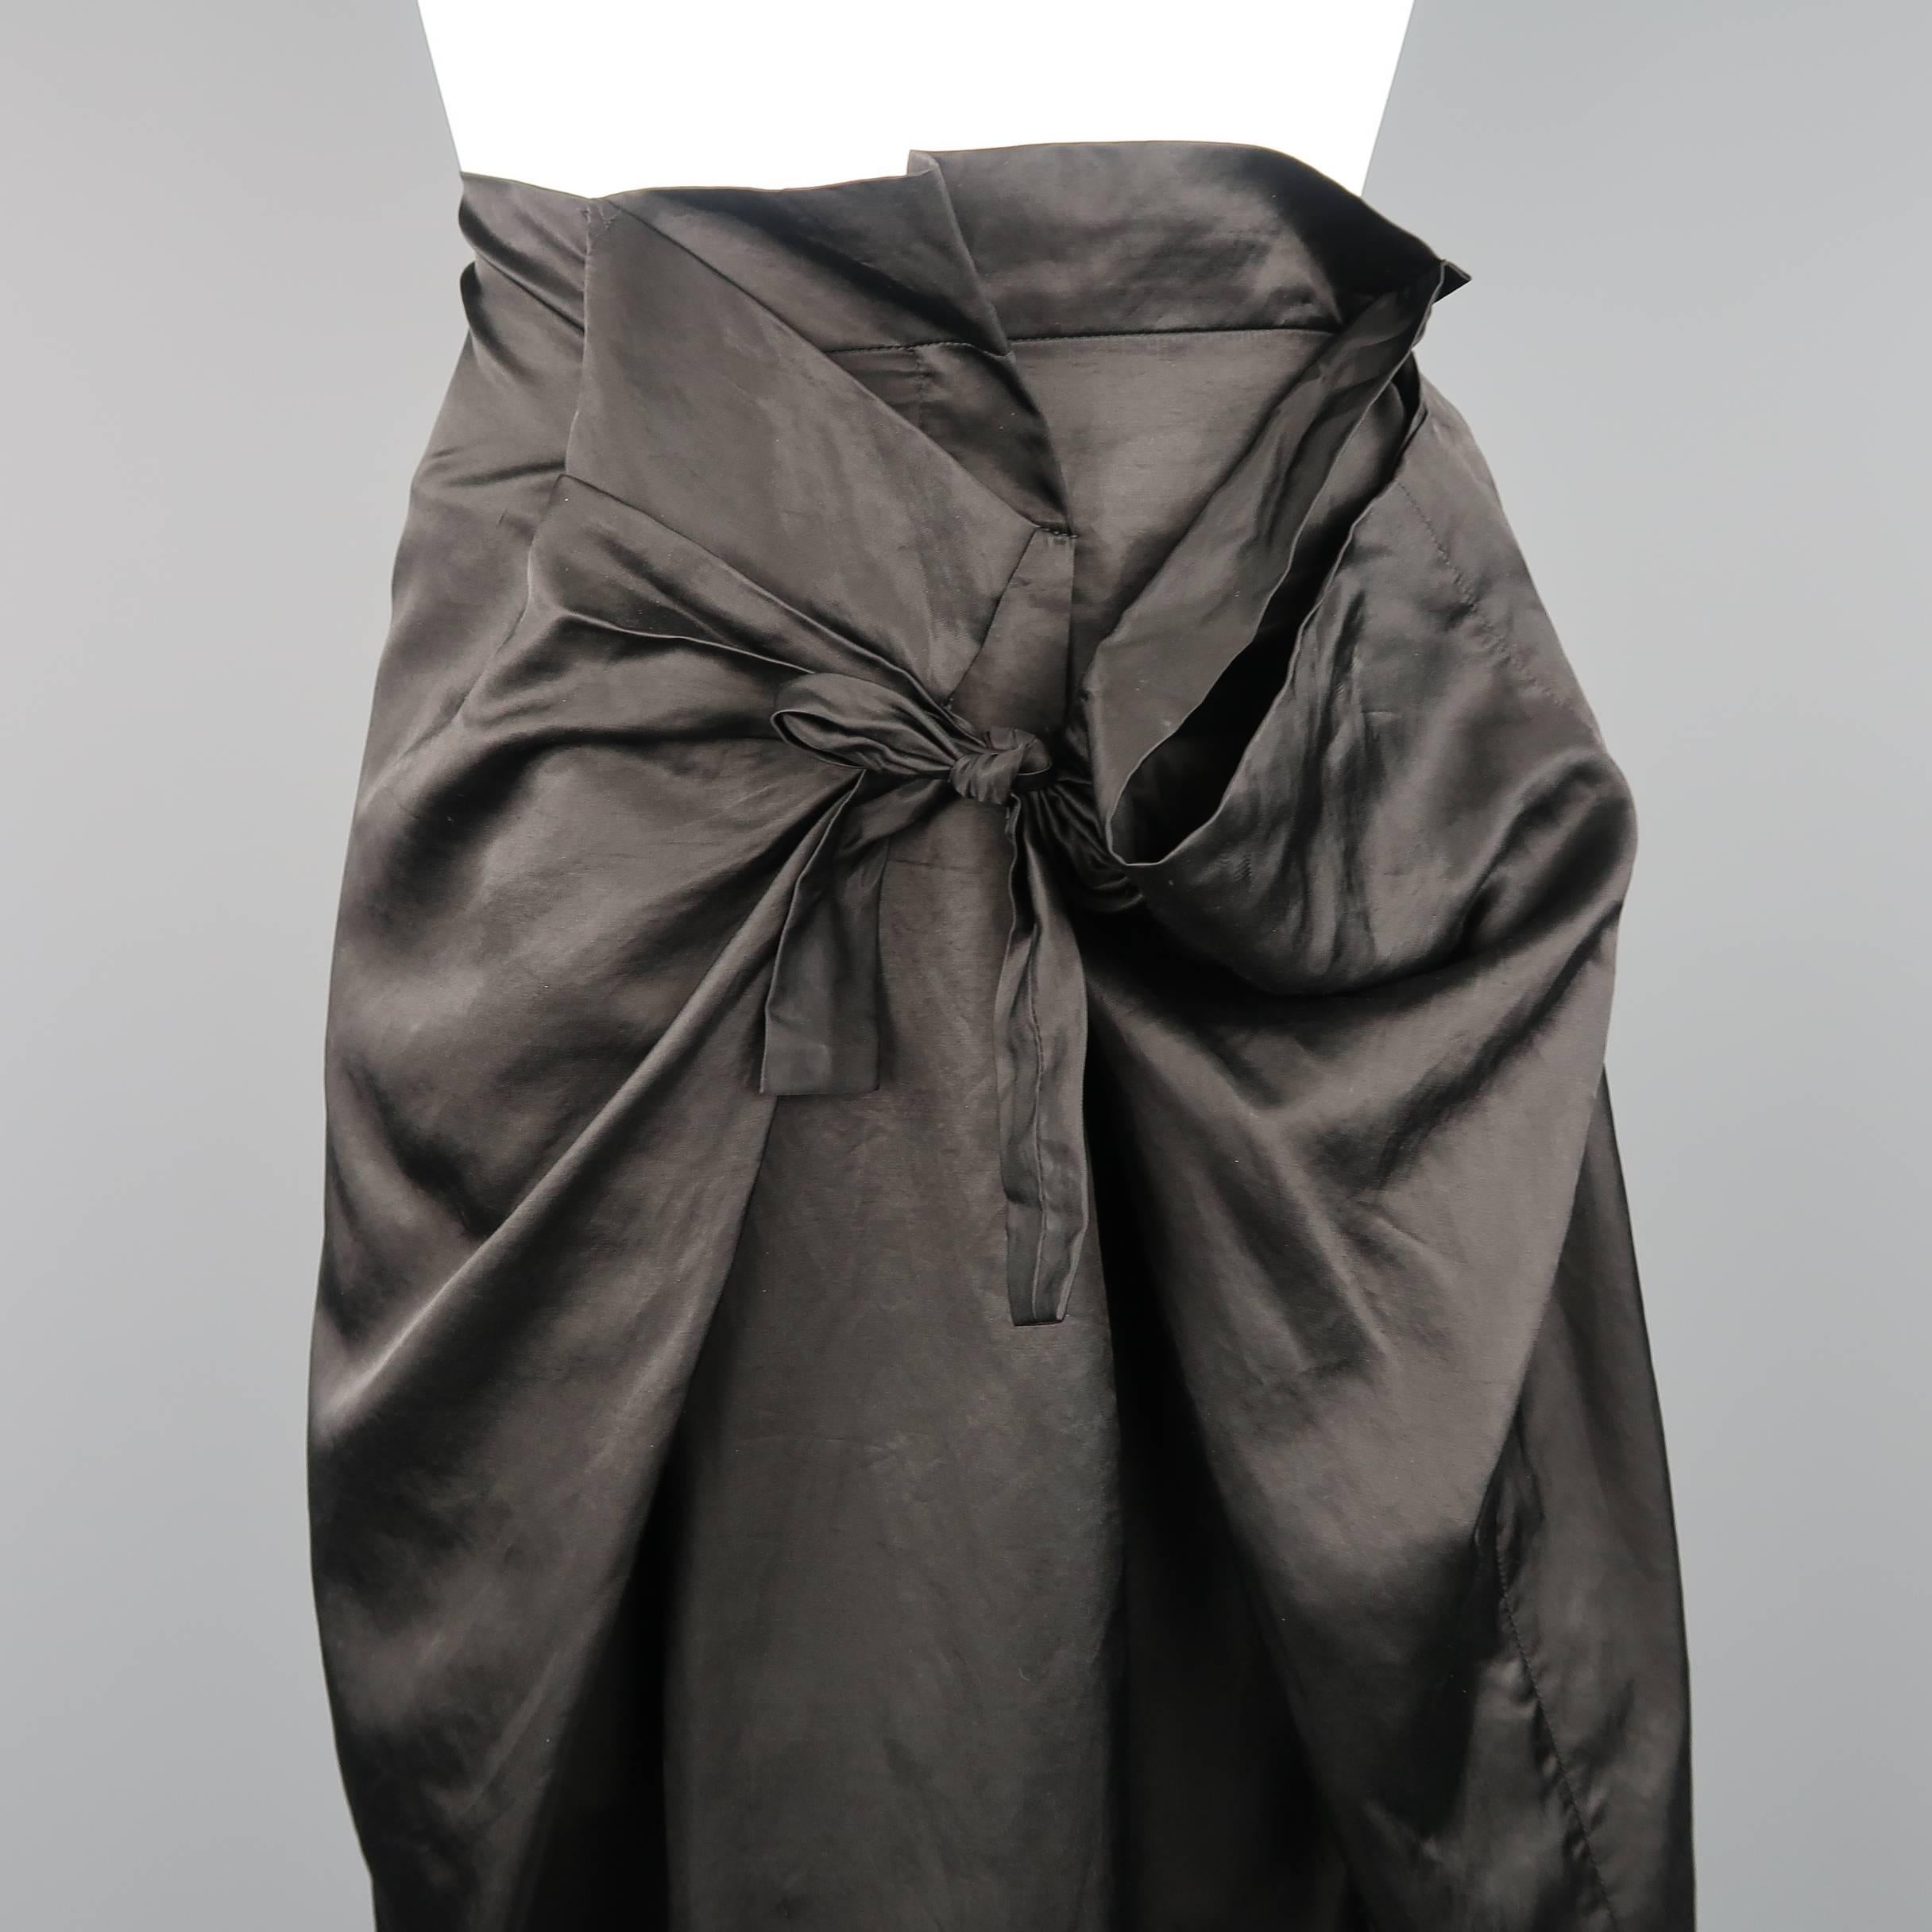 This avant garde DRIES VAN NOTEN A line skirt comes in a black taffeta with a unique double wrap tie construction, leaving a draped and gathered side panel. Discoloration on back. As-is. Made in France.
 
Fair Pre-Owned Condition.
Marked: EU 42
